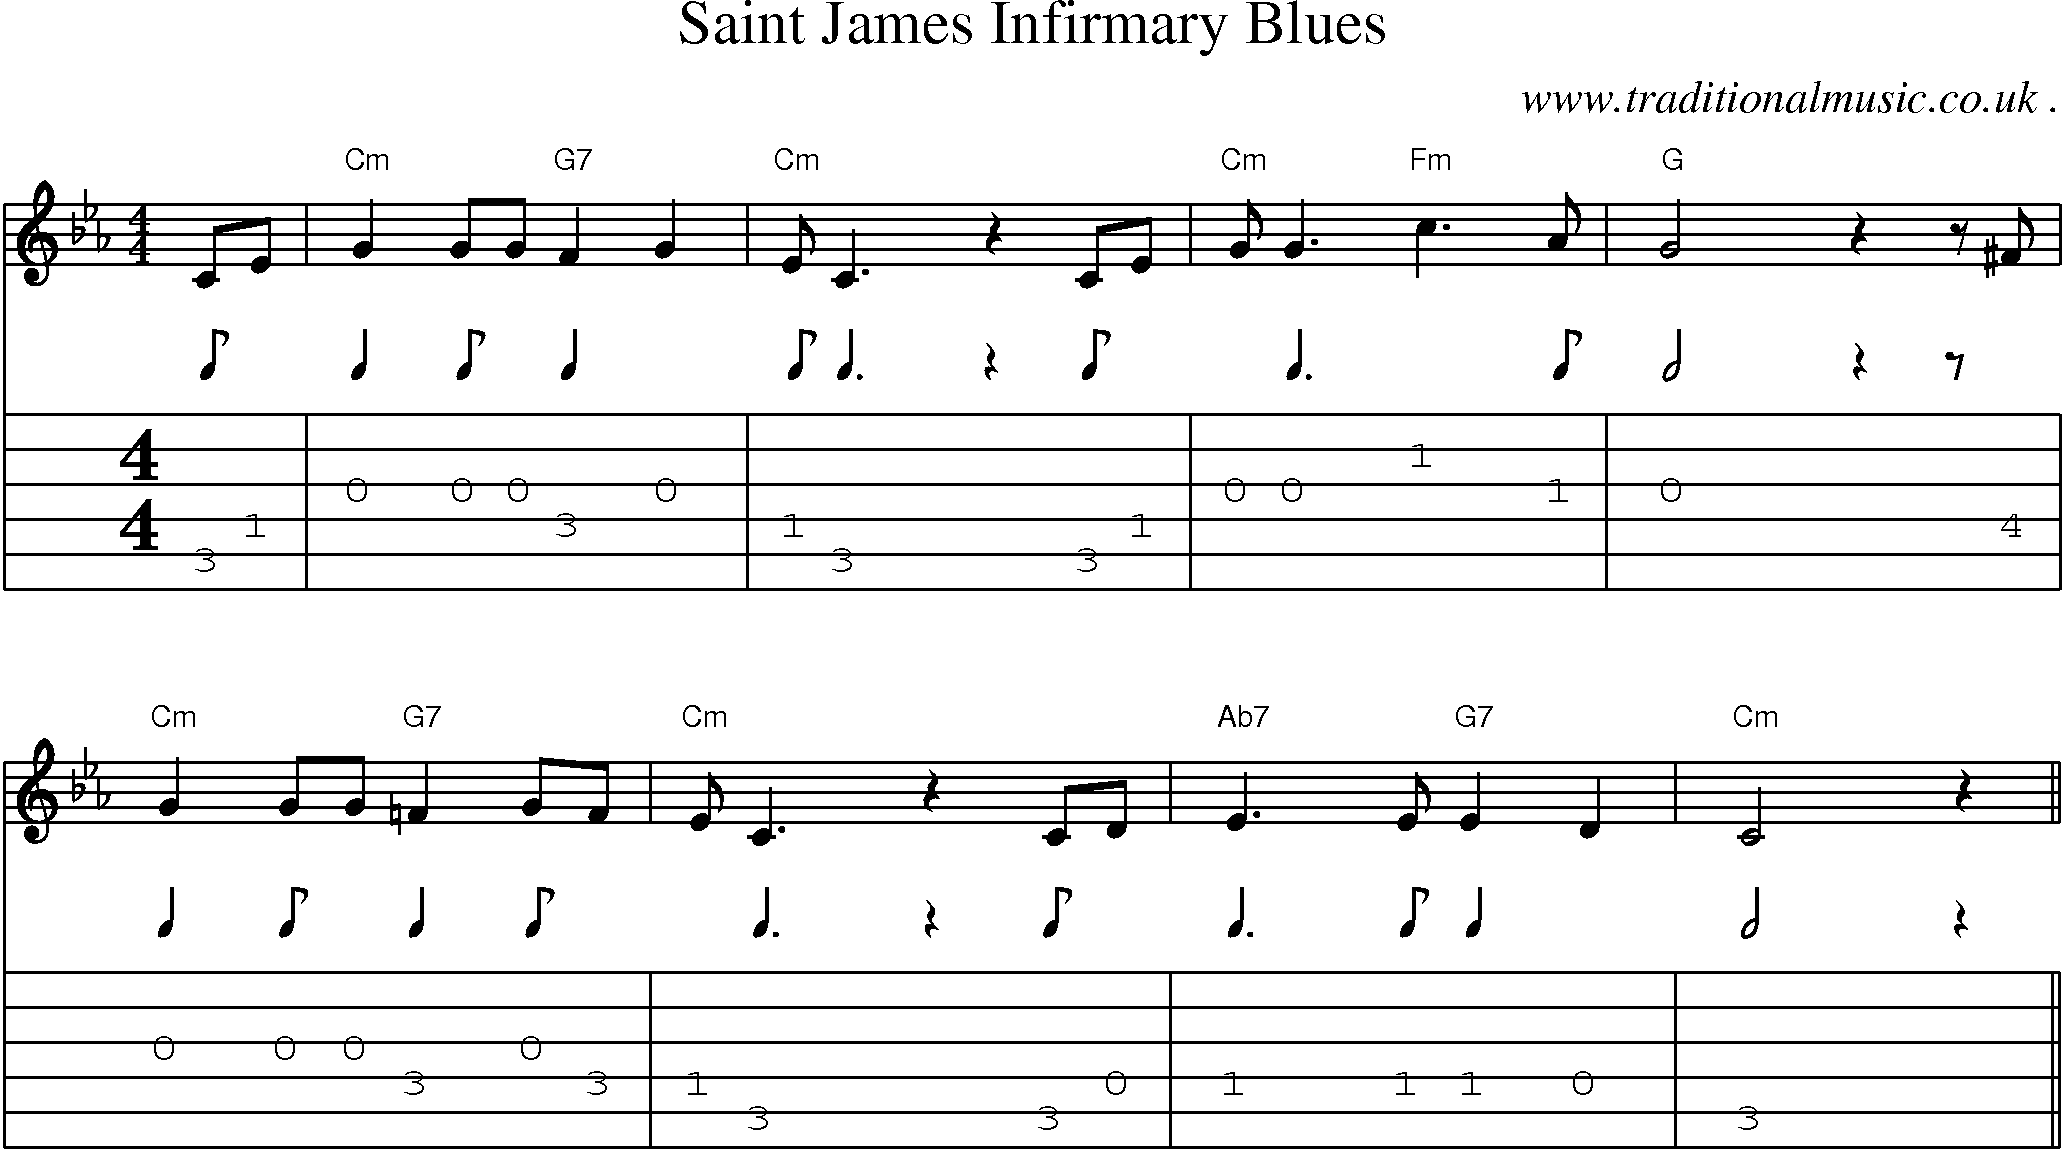 Music Score and Guitar Tabs for Saint James Infirmary Blues